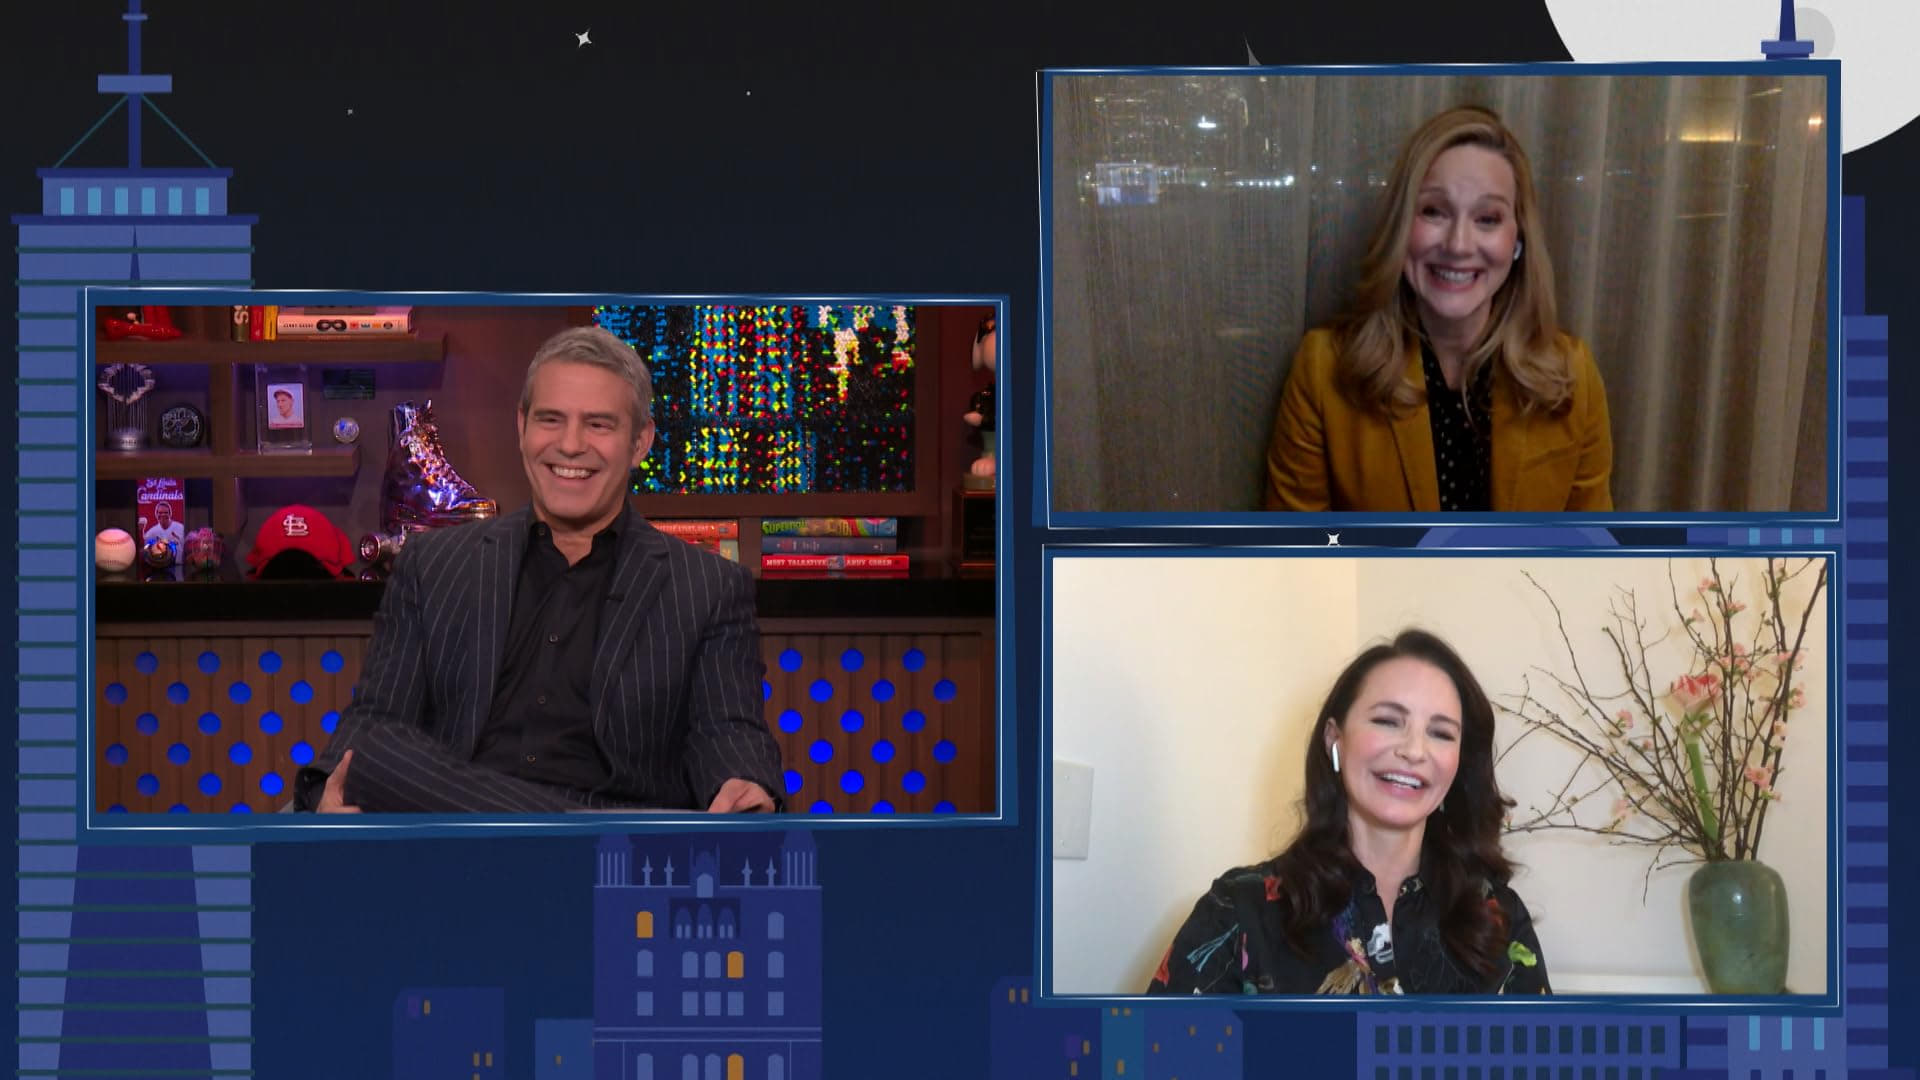 Watch What Happens Live with Andy Cohen Staffel 19 :Folge 12 